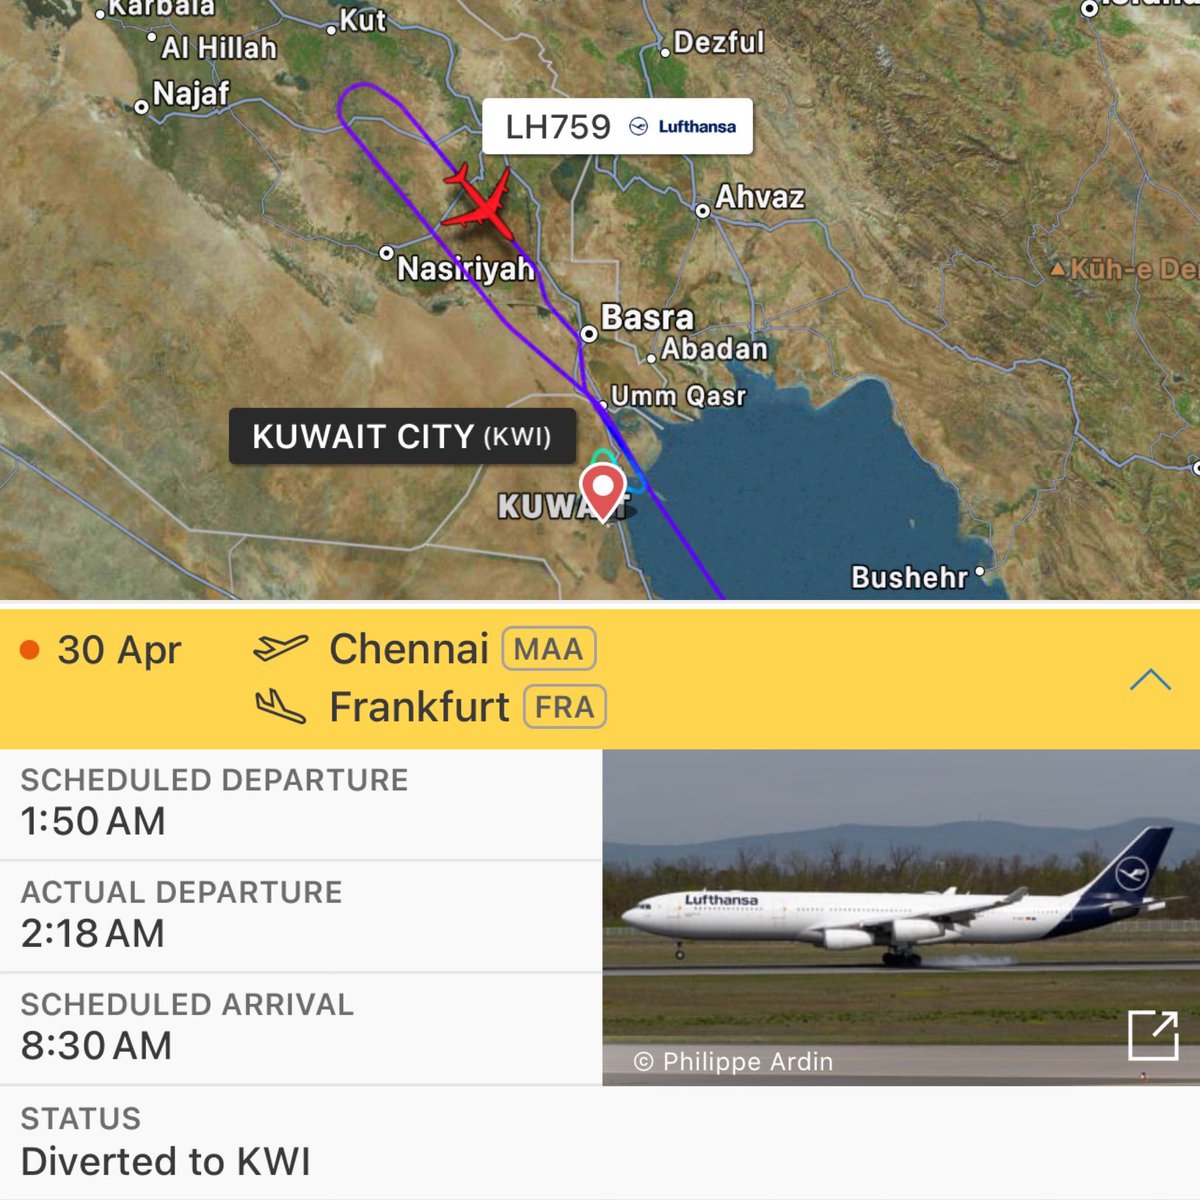 Lufthansa operating from Chennai to Frankfurt was diverted to Kuwait after declaring emergency due to a medical issue earlier today.

The aircraft later left Kuwait & arrived at Frankfurt with a delay of 3 hours

#aerowanderer #aviation #lufthansa #chennai #chennaiairport